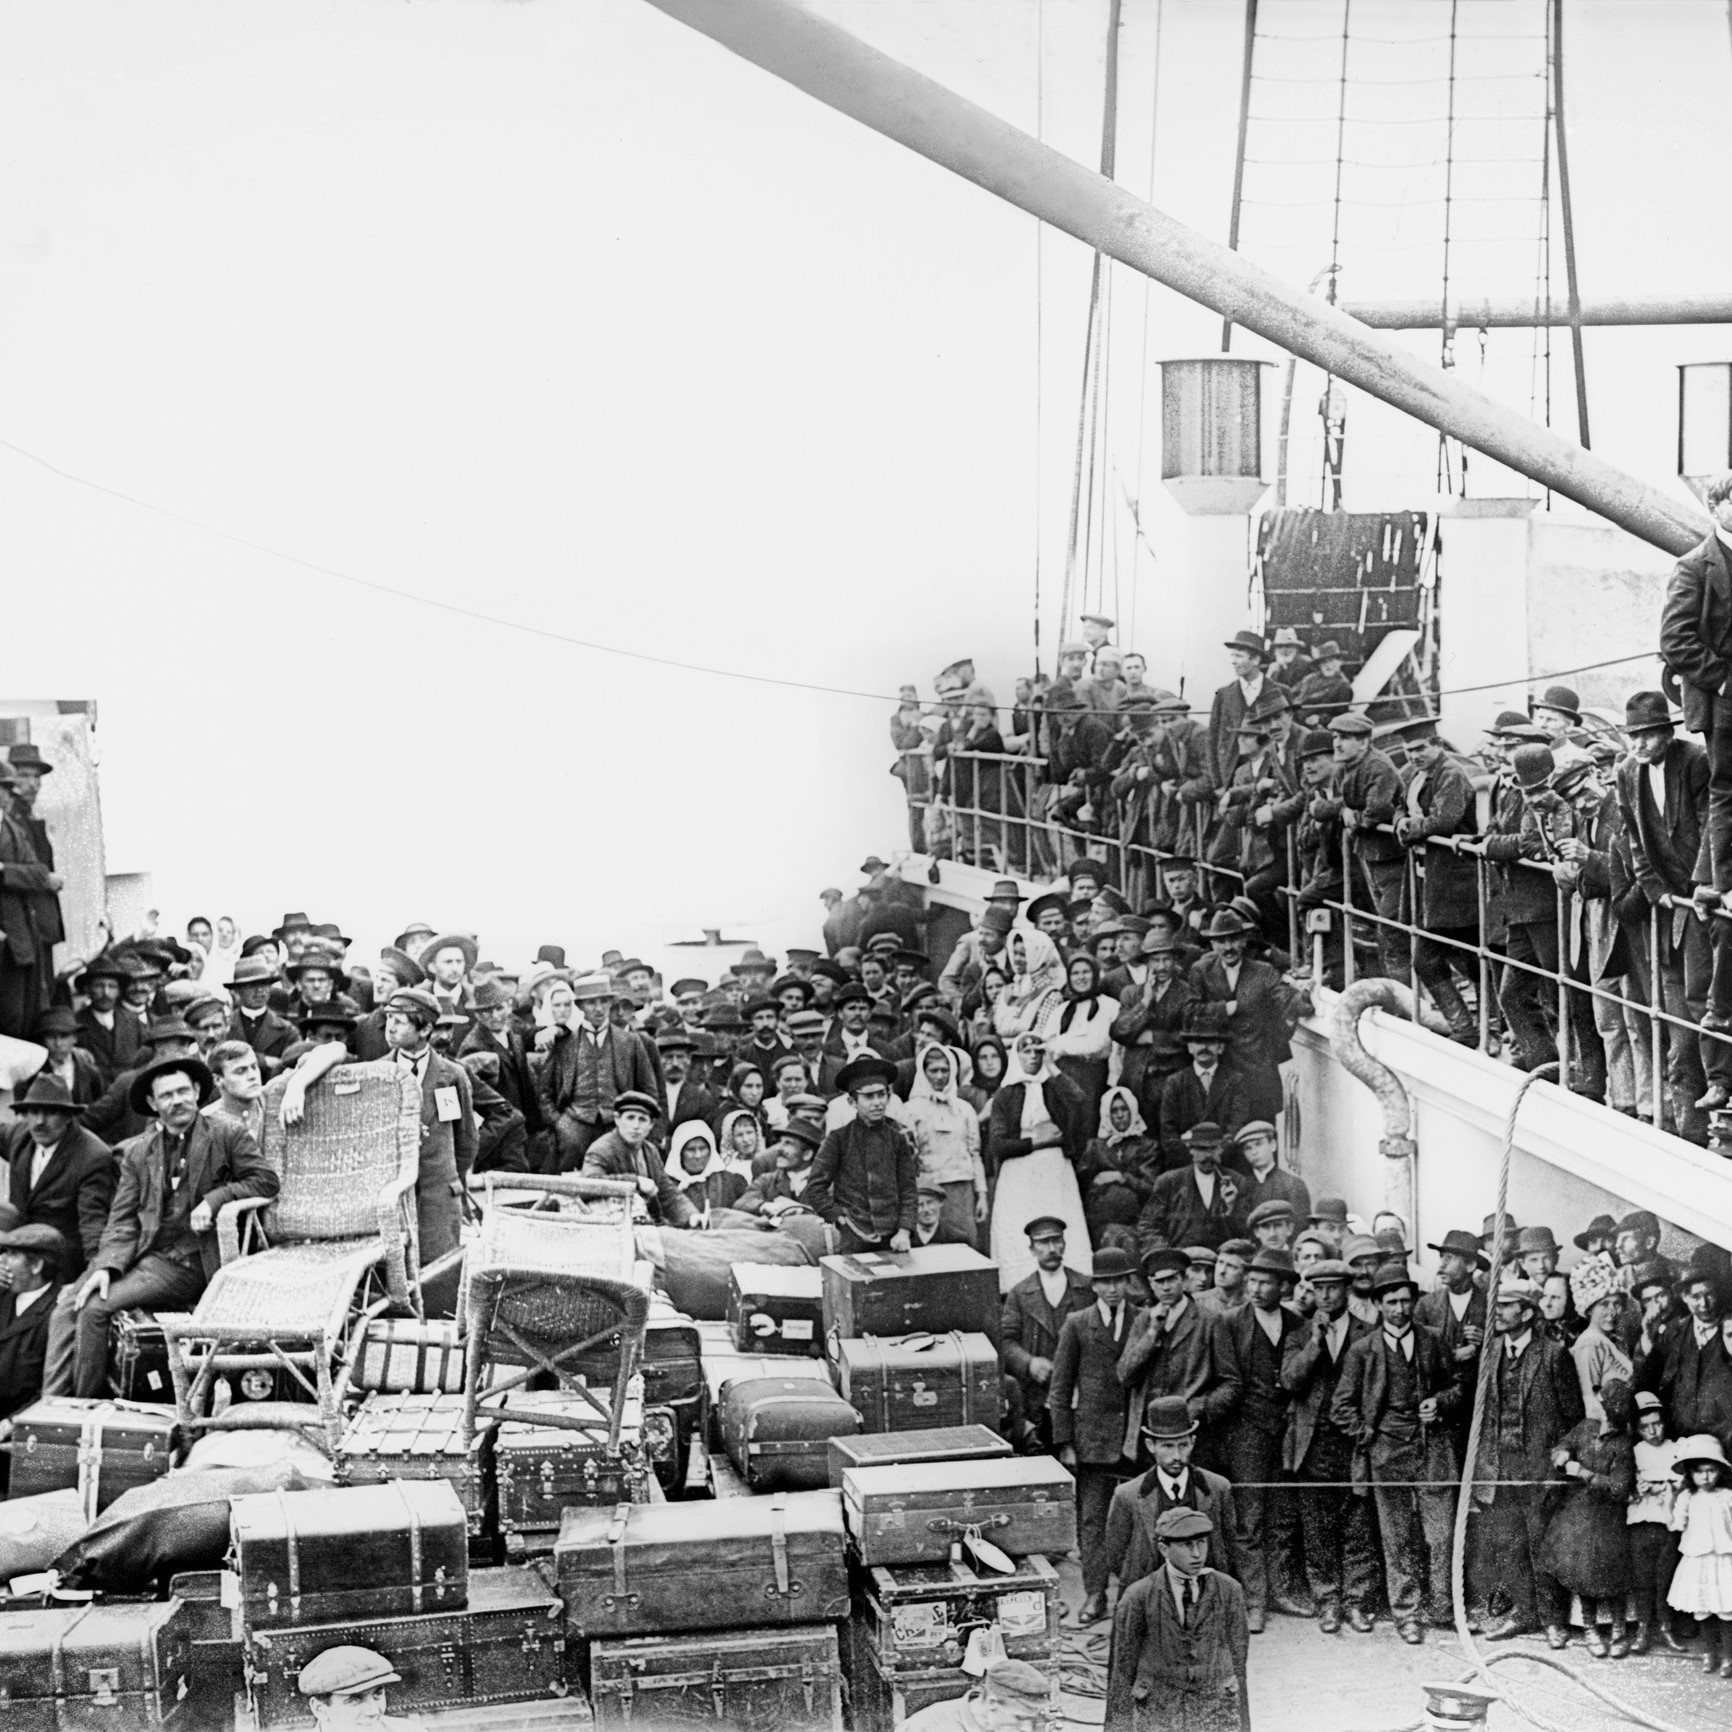 Black and white image of hundreds of immigrants packed onto deck of ship